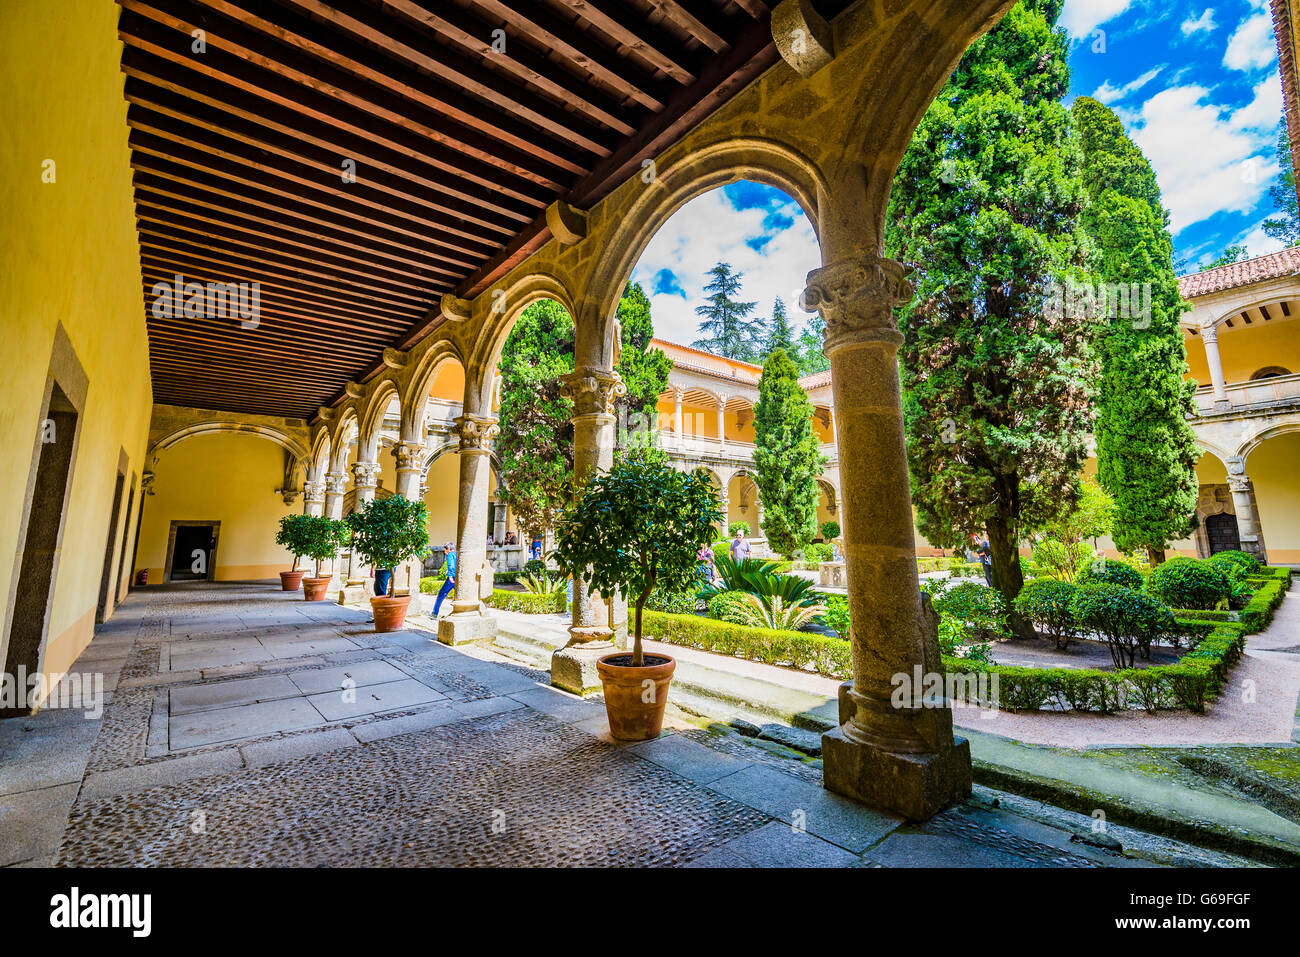 Cloister of the Monastery of Yuste, founded by the Hieronymite Order of ...